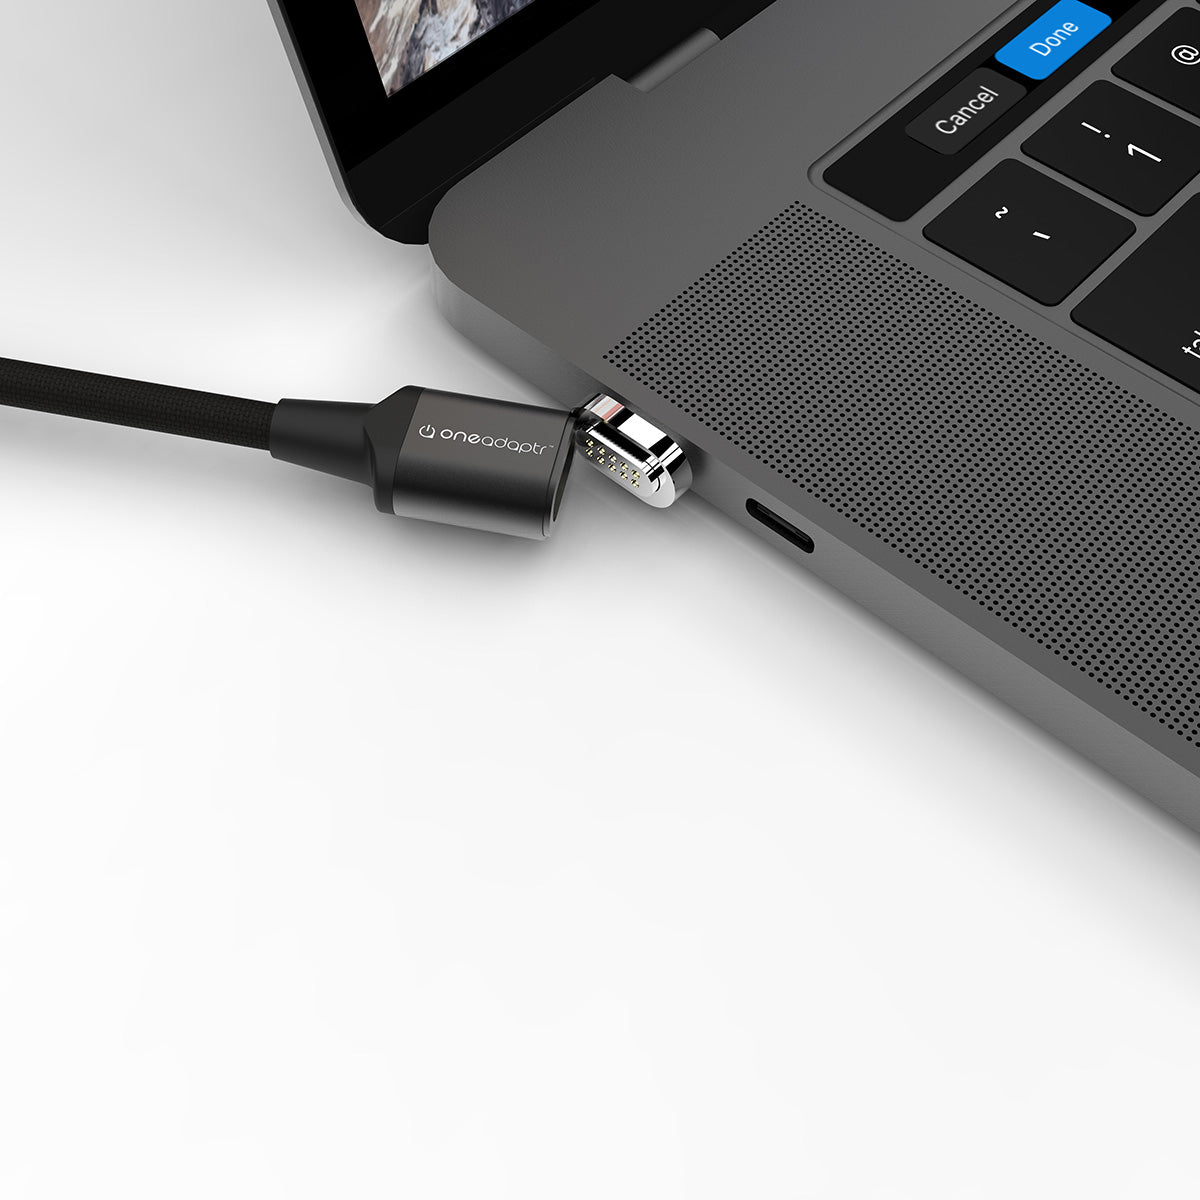 EVRI Magnetic Tip USB Cable (Sync & Charge for MacBook & USB C devices)